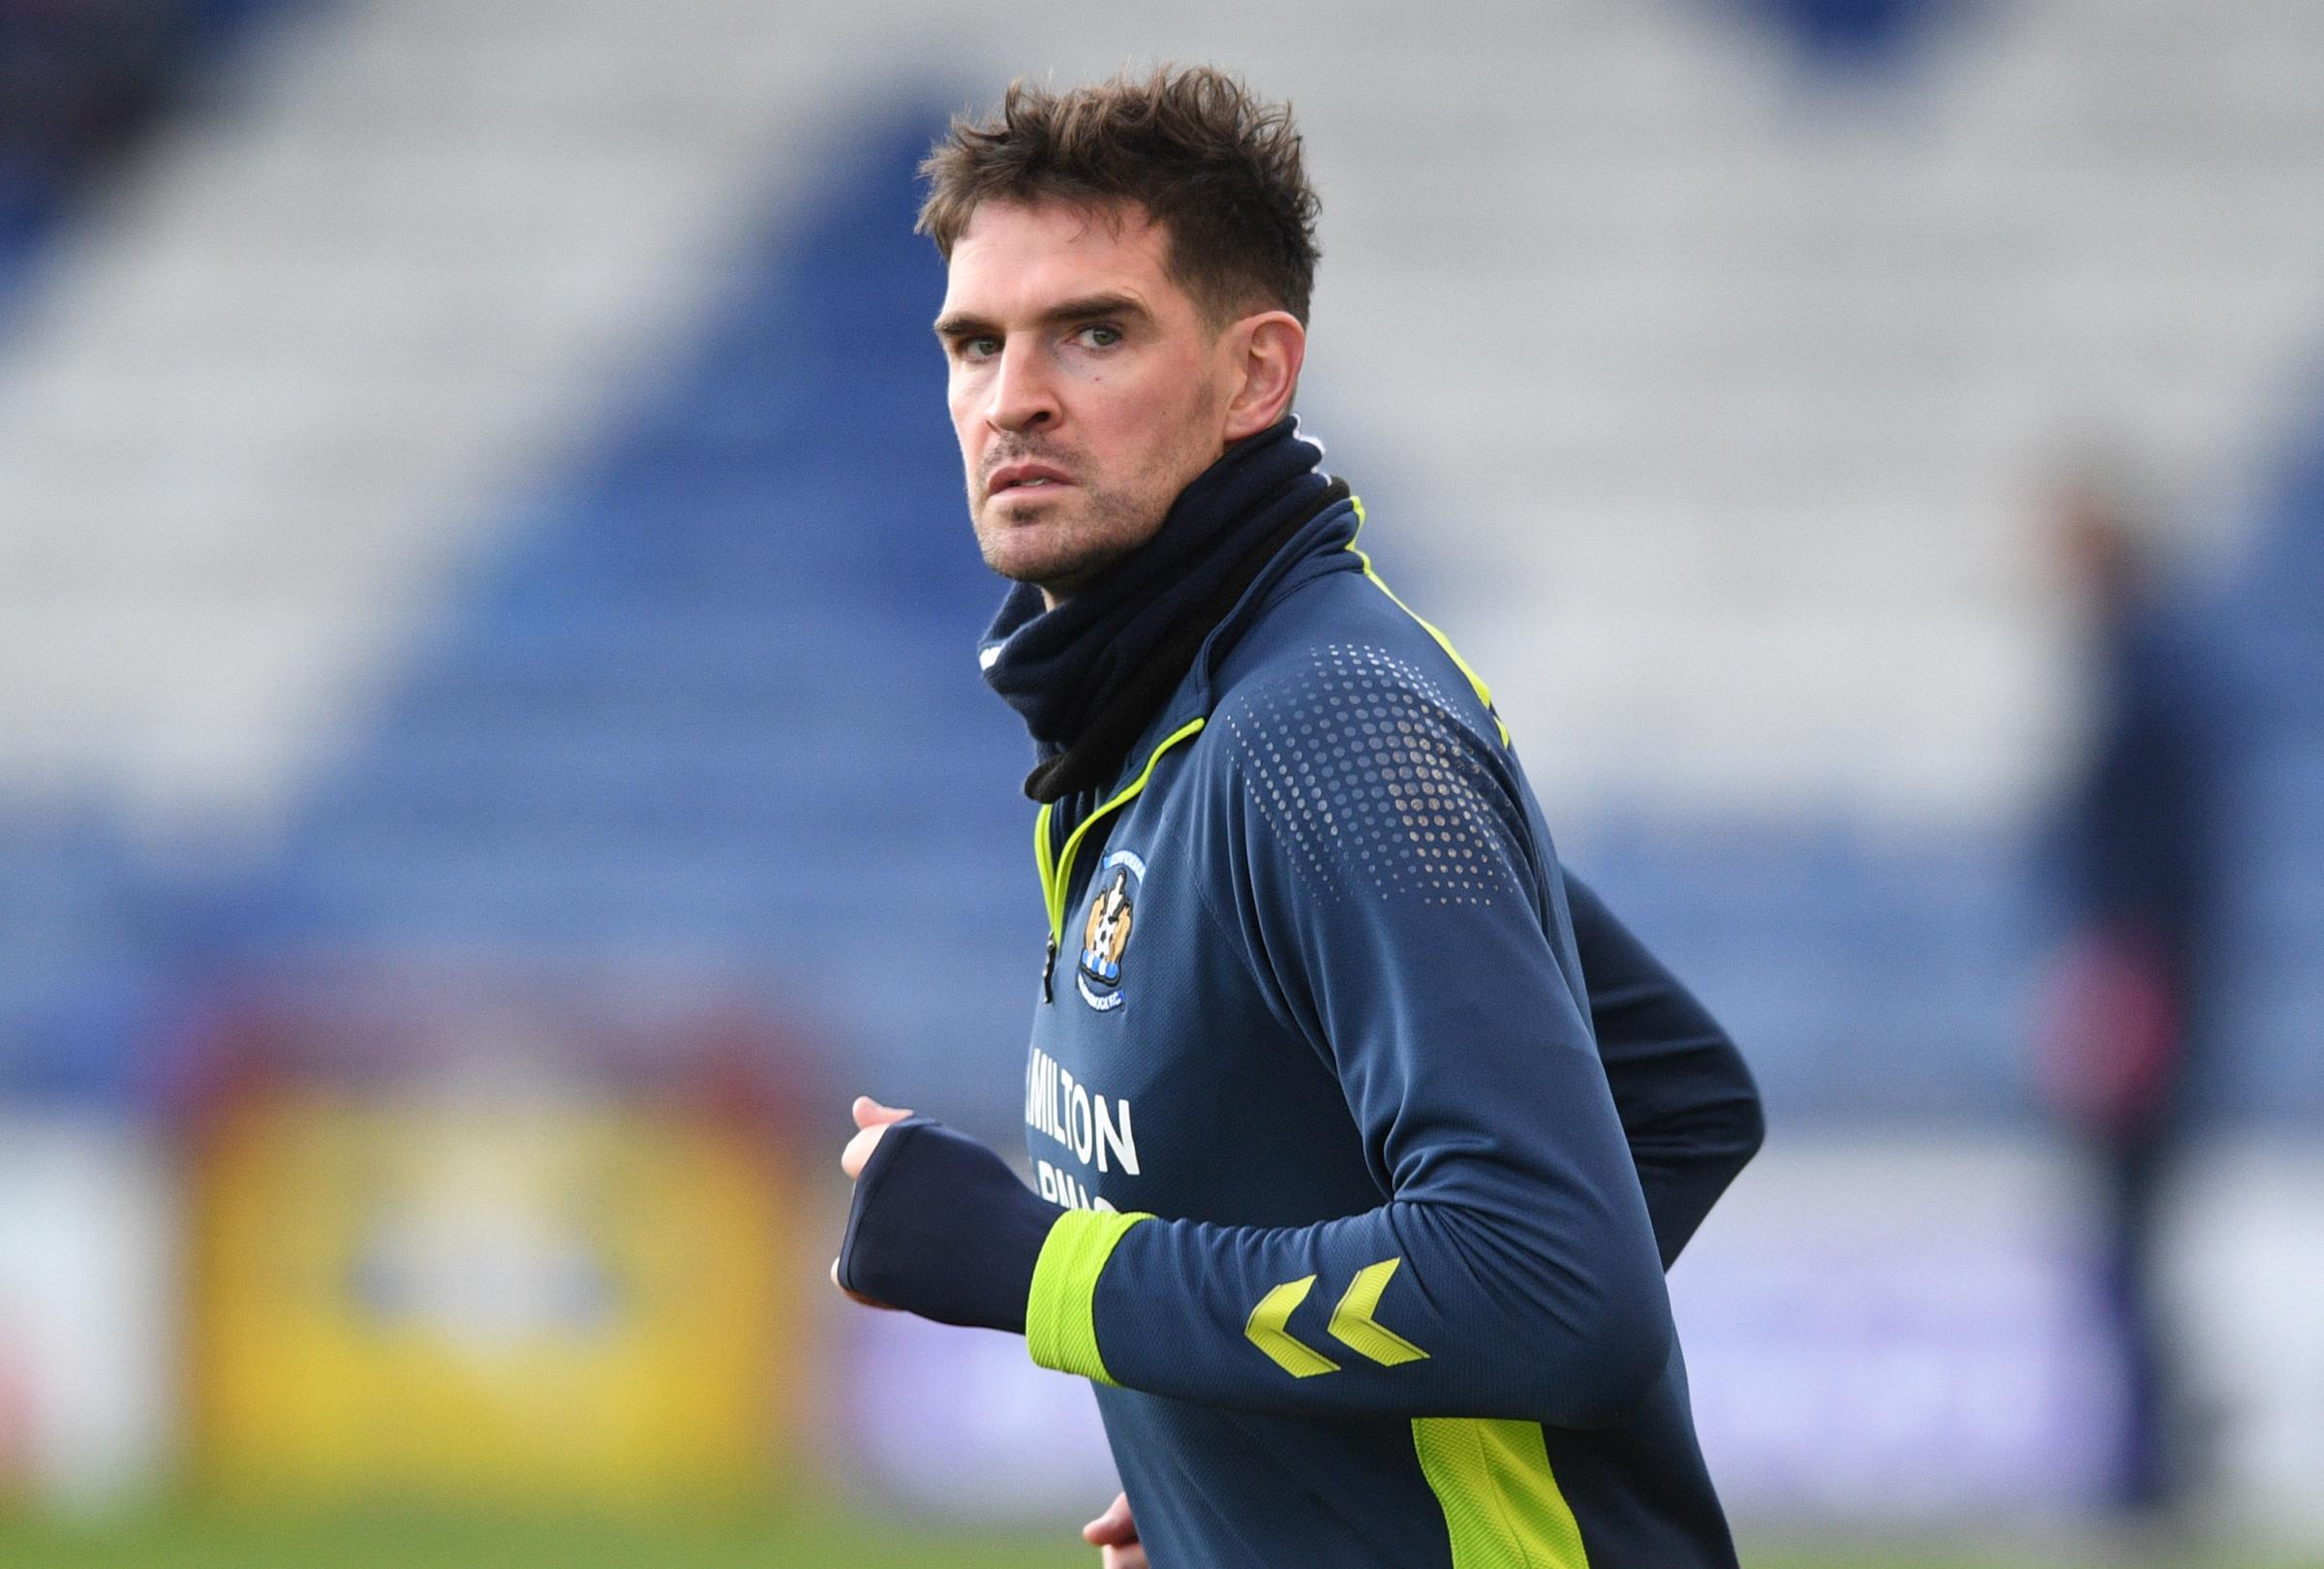 Kilmarnock launch investigation into alleged Kyle Lafferty 'sectarian' comments after video emerges